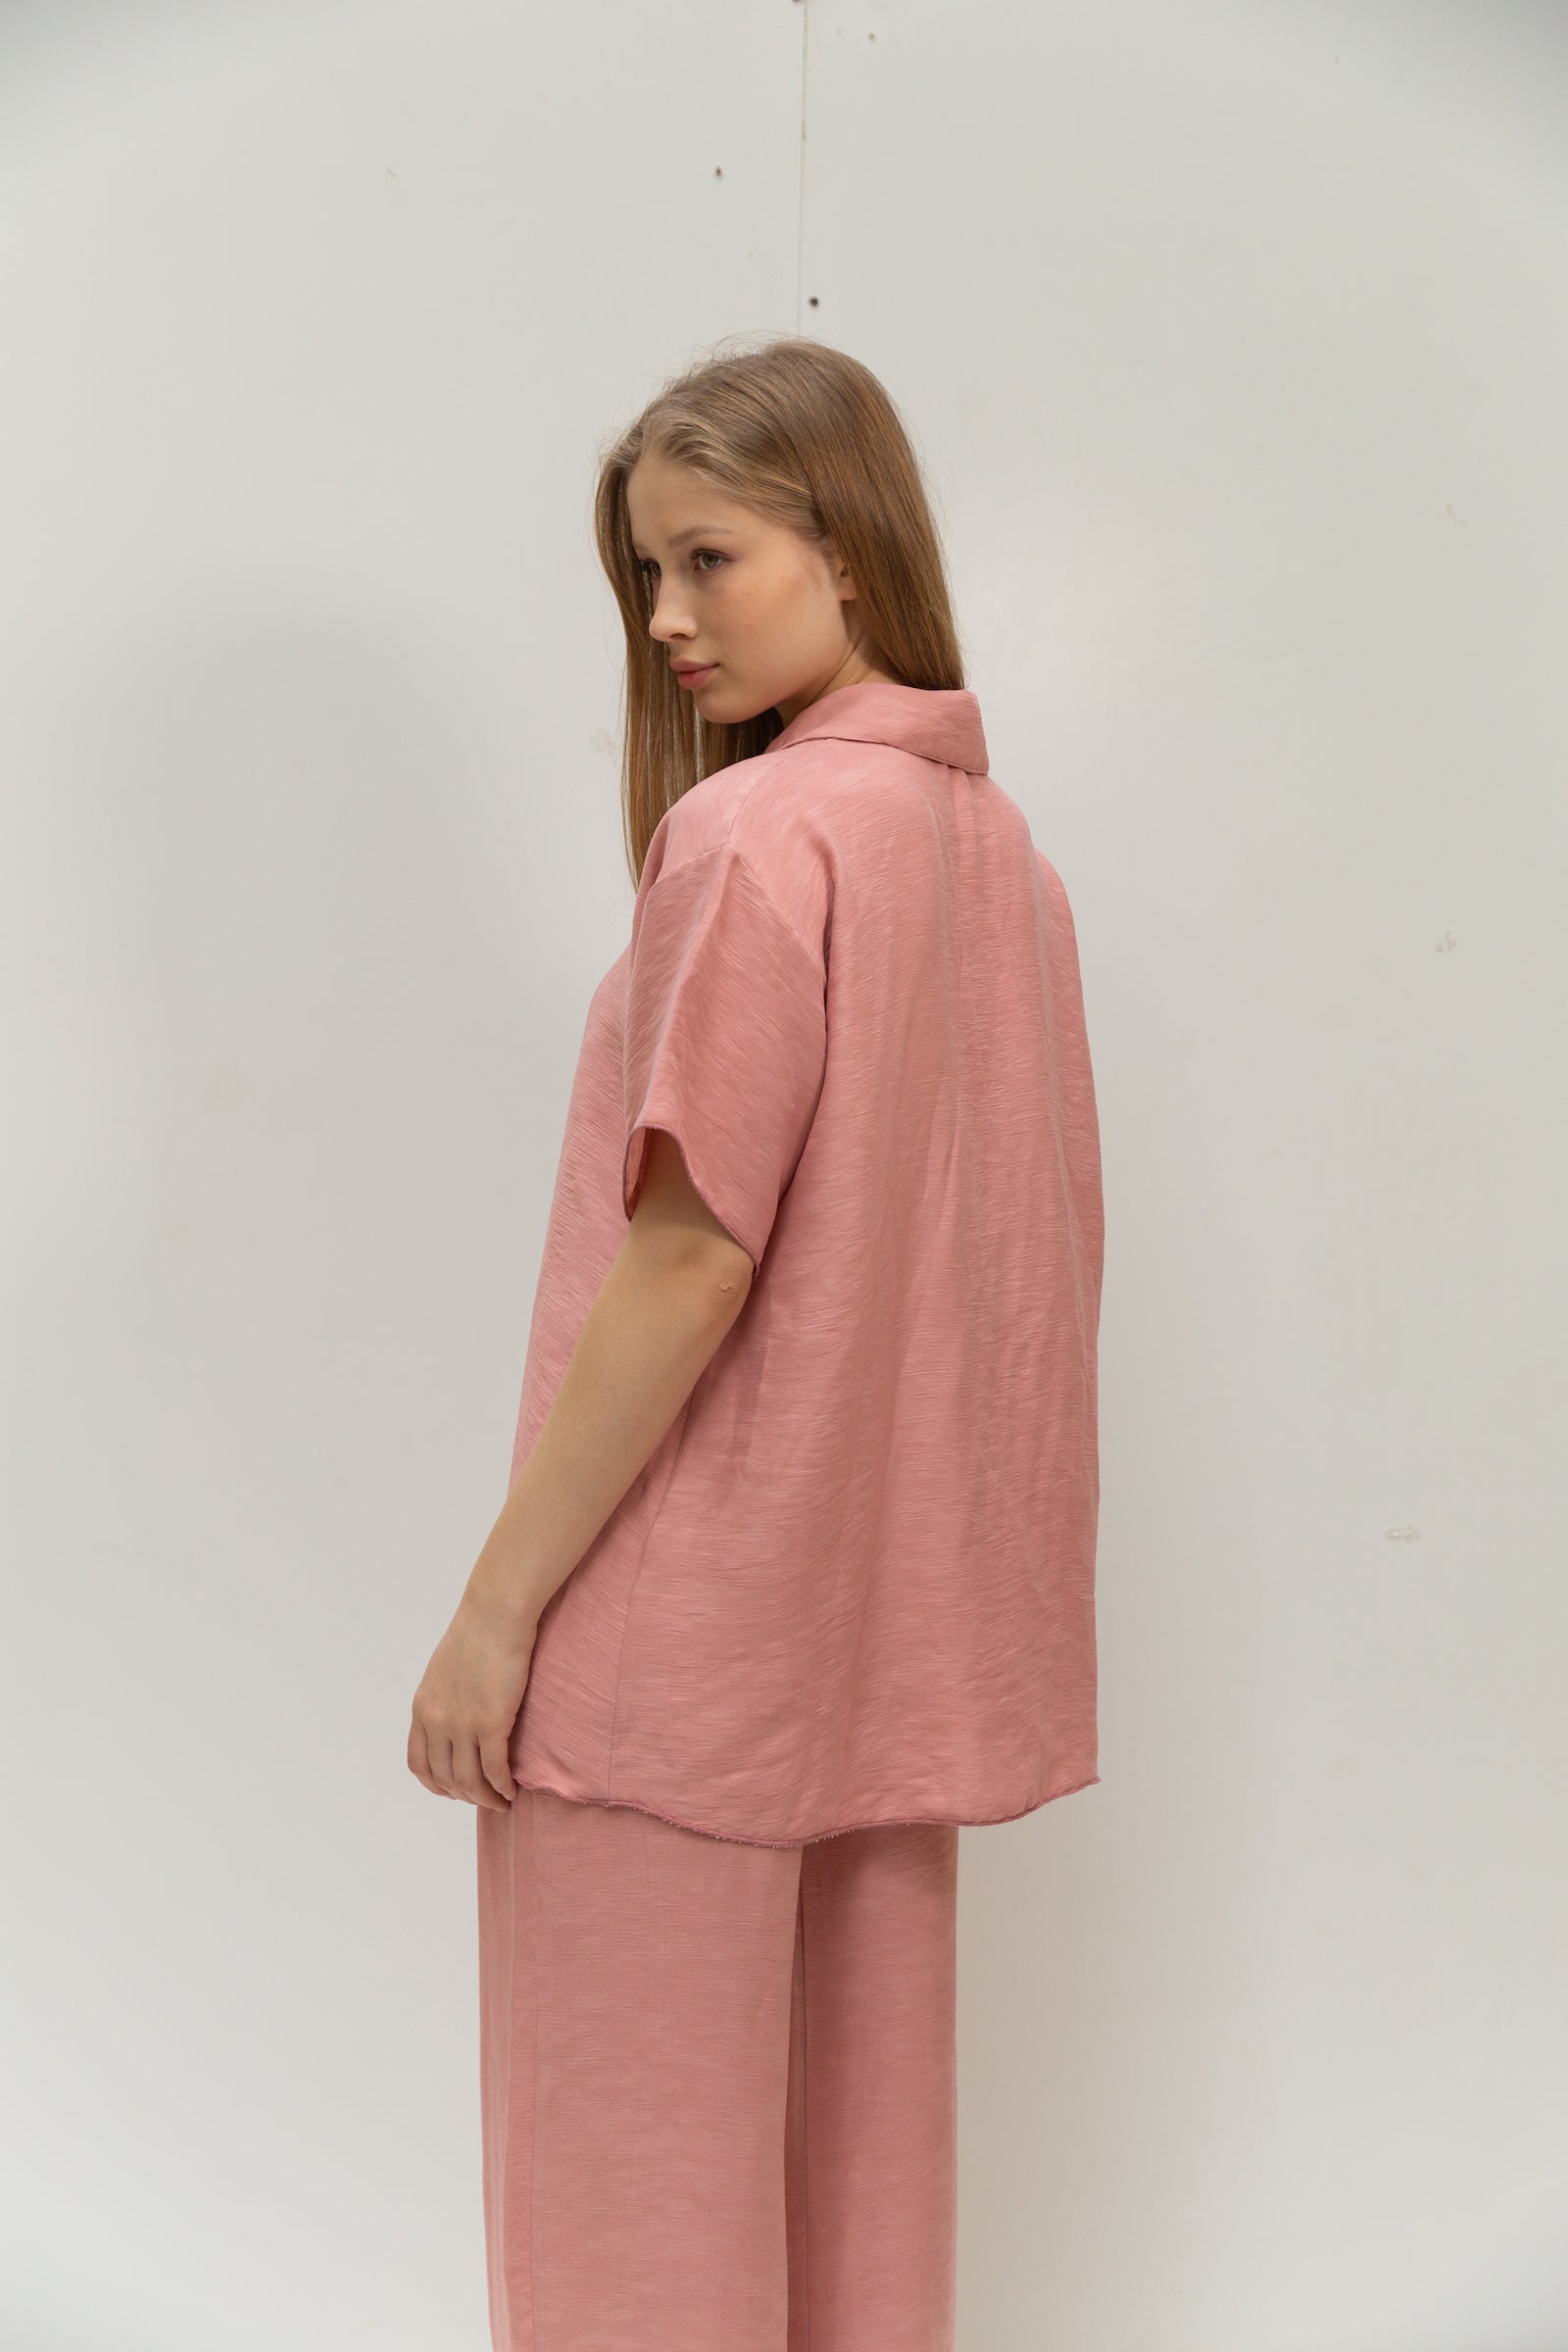 Pleated shirt in pink